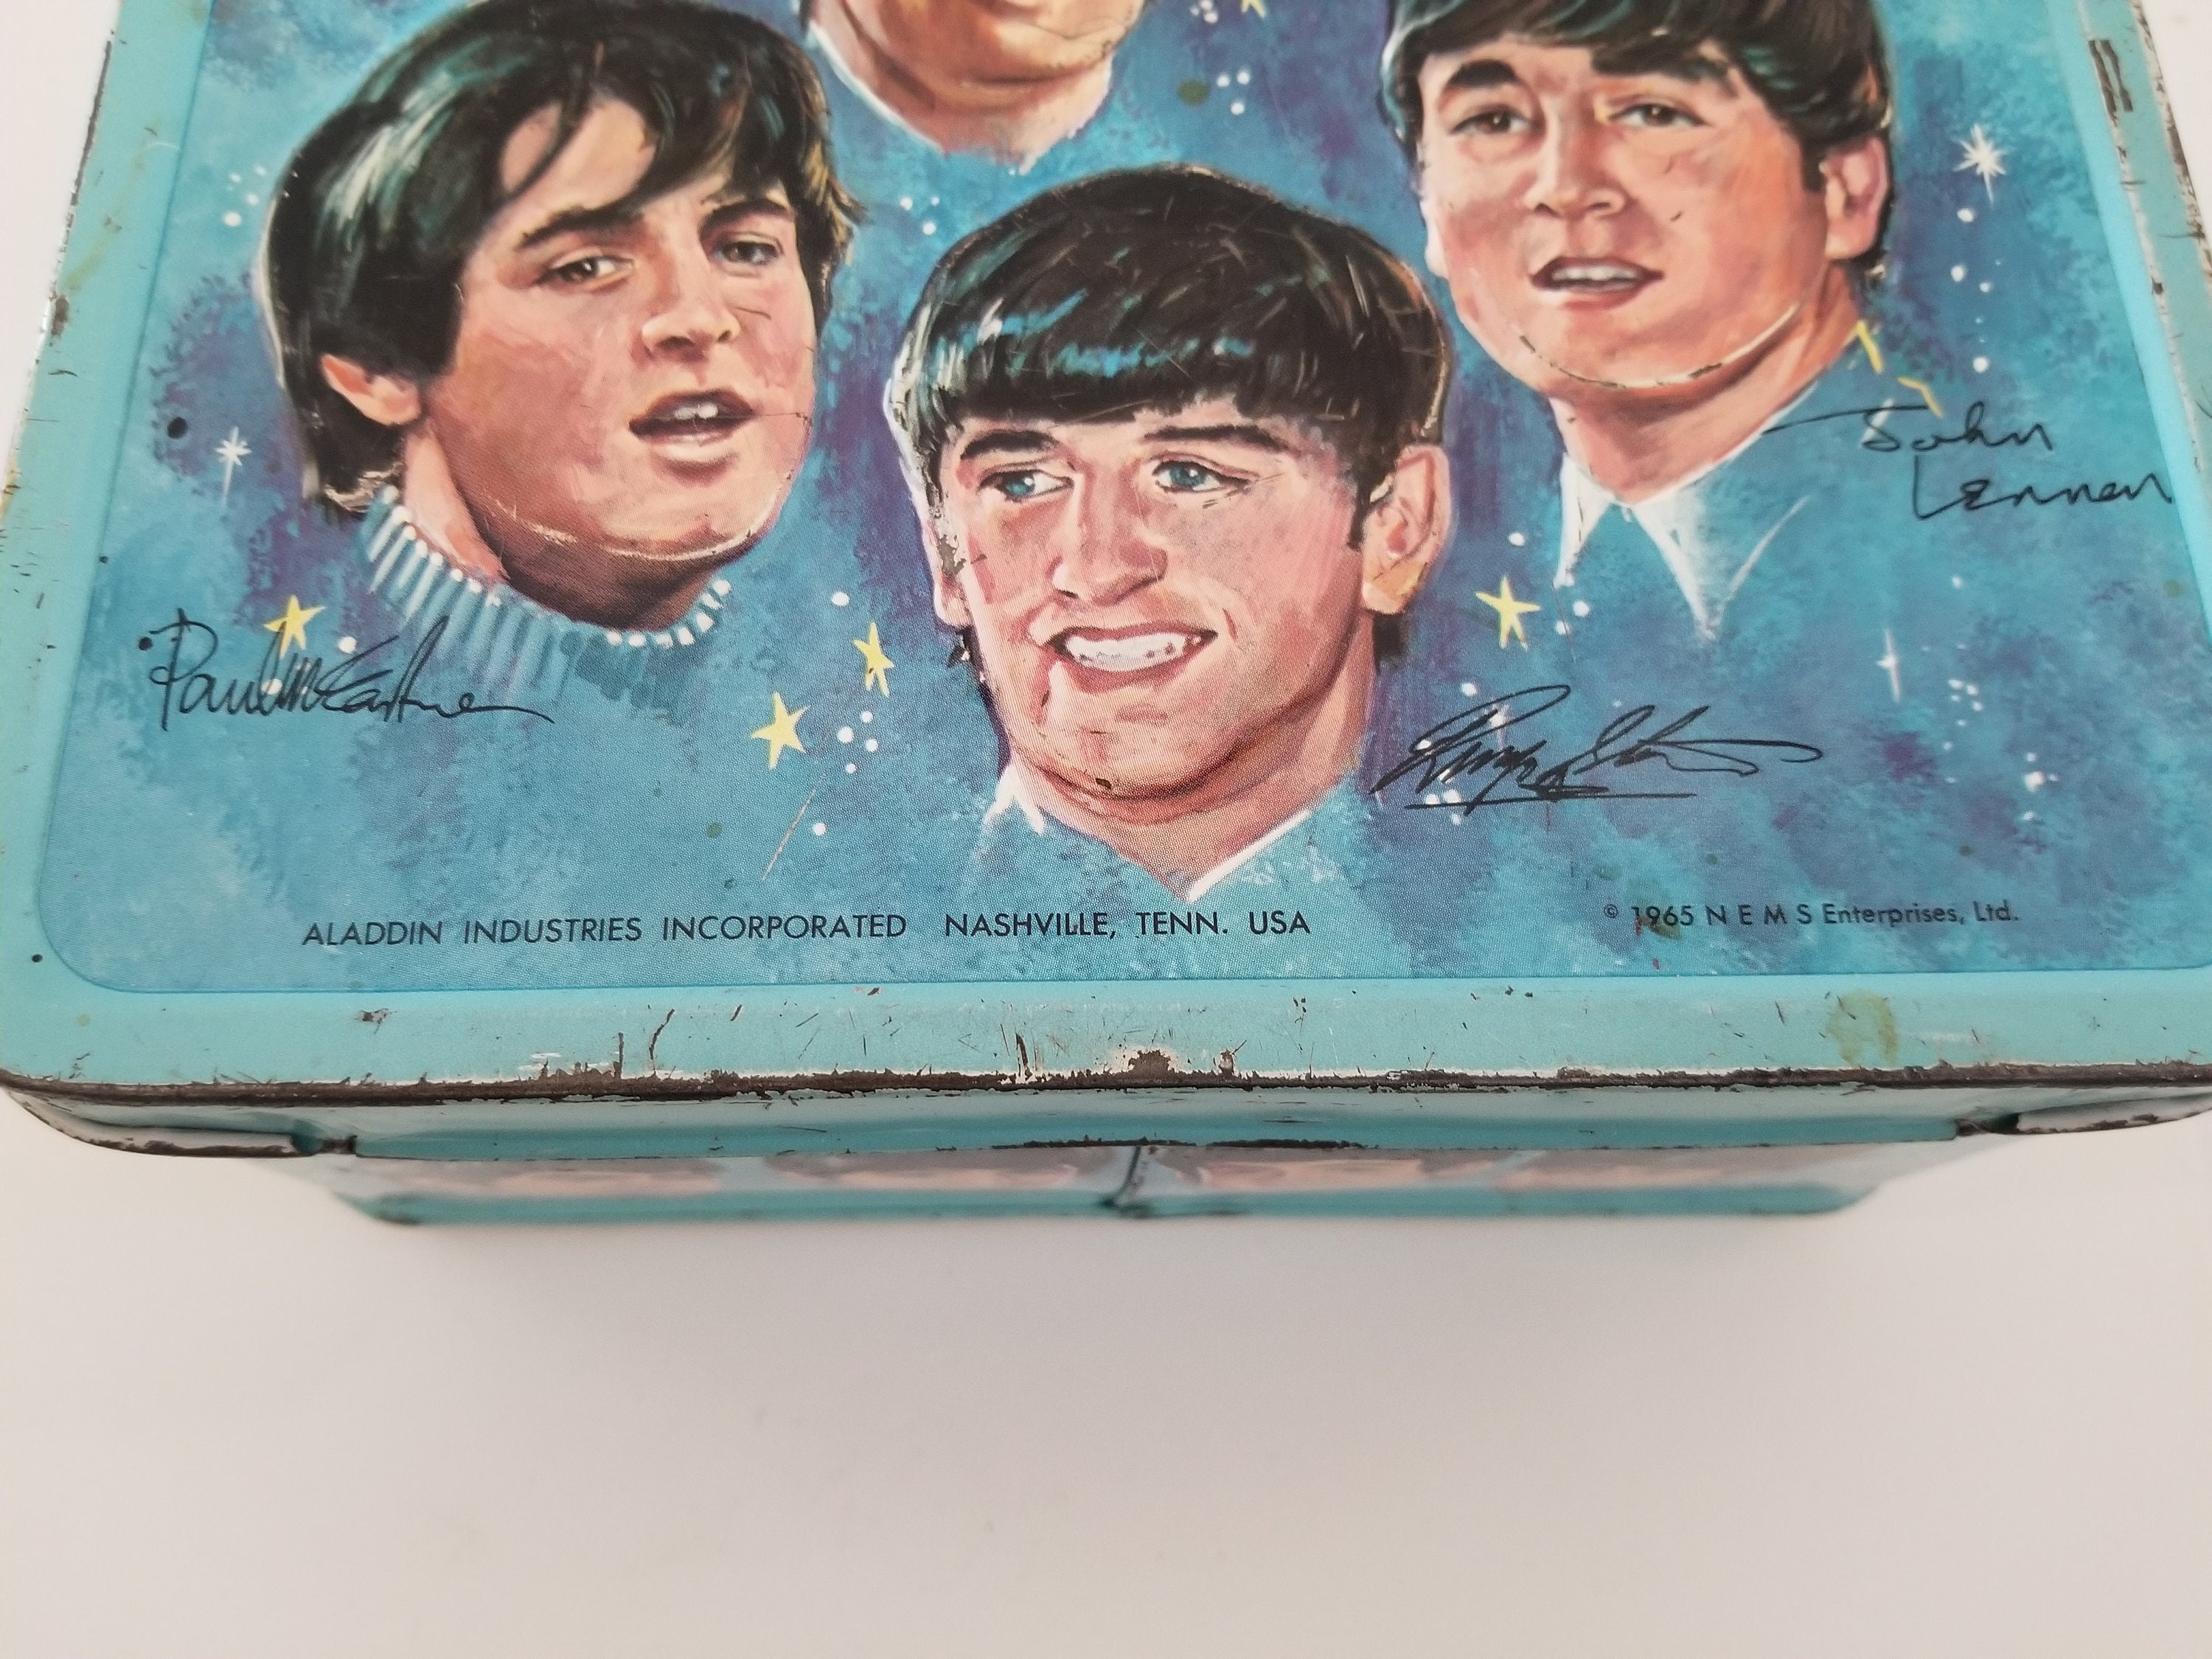 The Beatles Vintage Metal Lunchbox by Aladdin, 1965